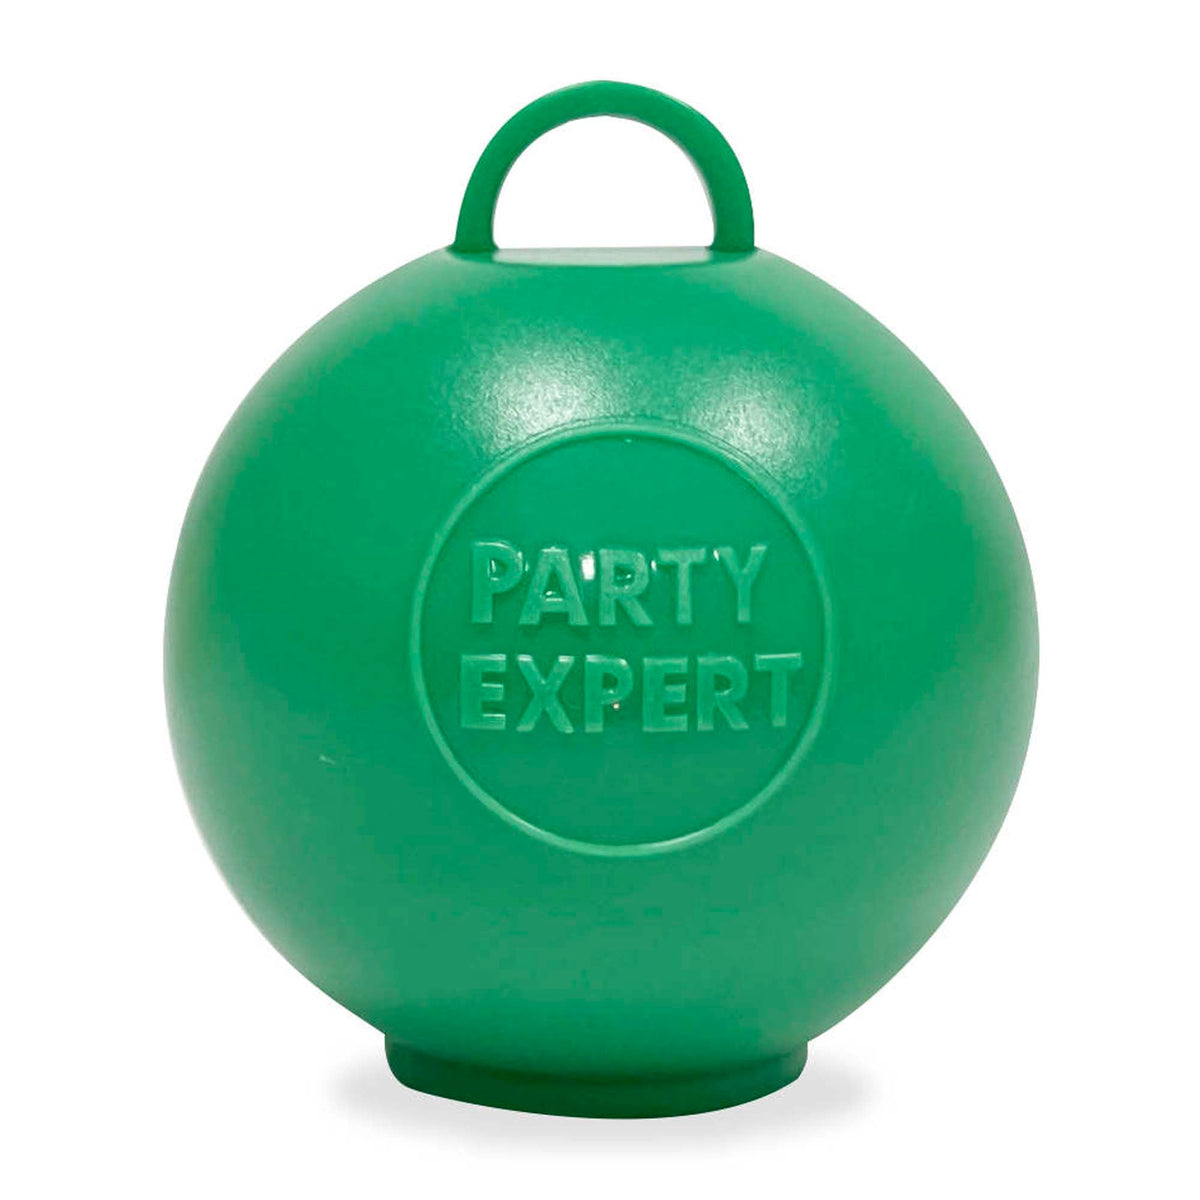 Dongguan Caipai Plastic Hardware Balloons Mid Green Bubble Balloon Weight, 1 Count 810077659625